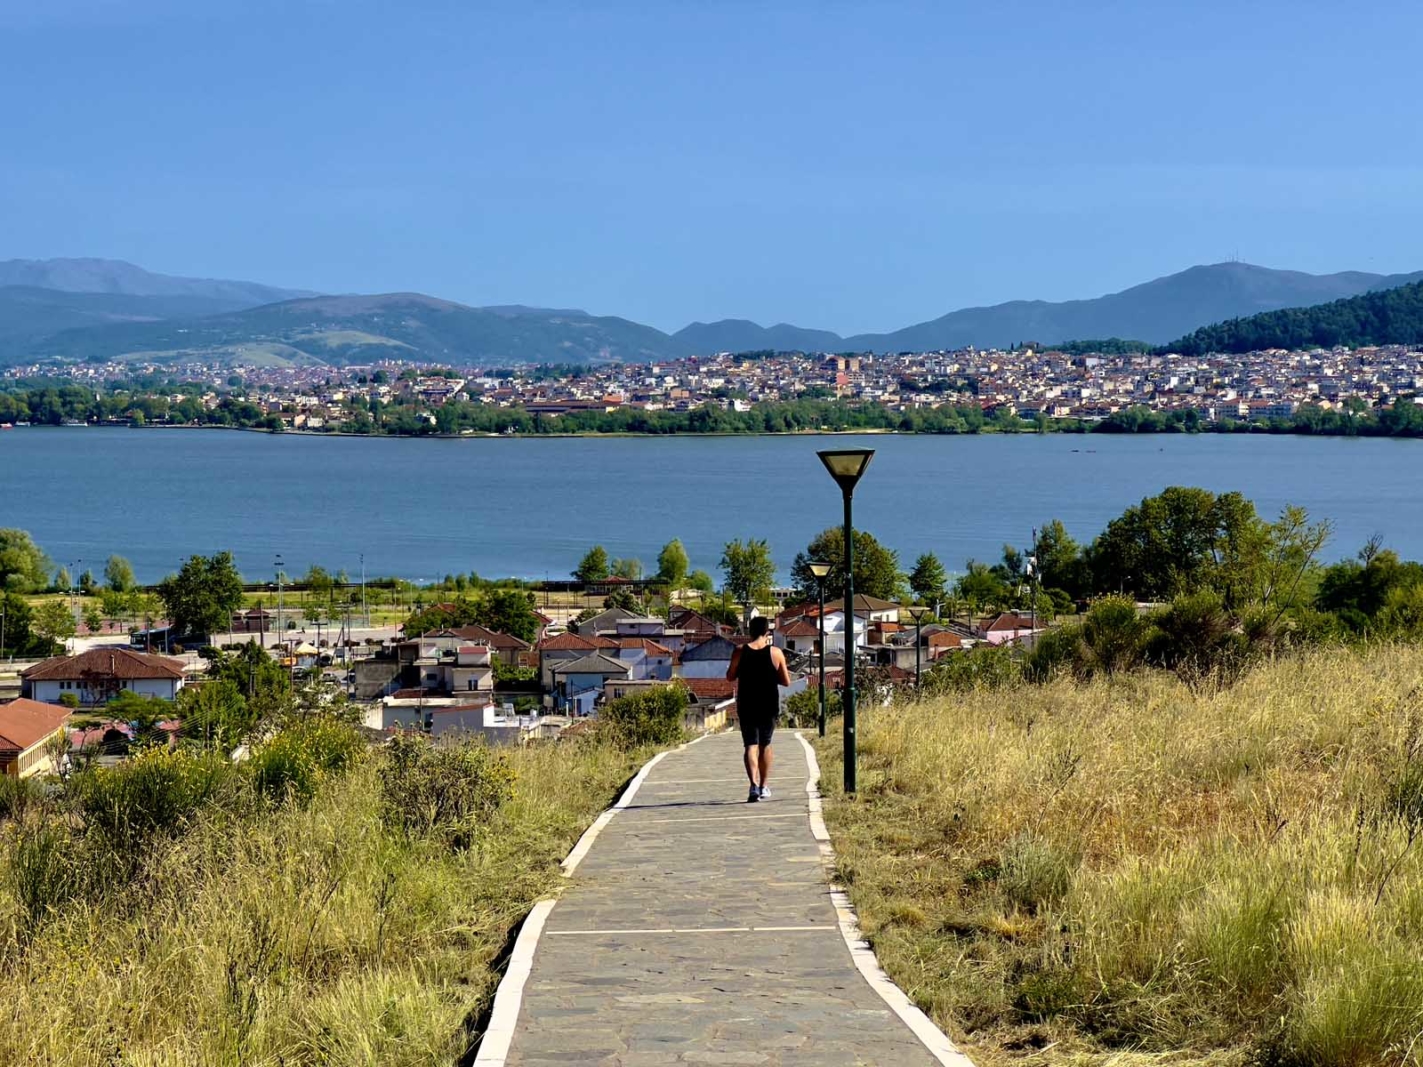 Things to do in ioannina